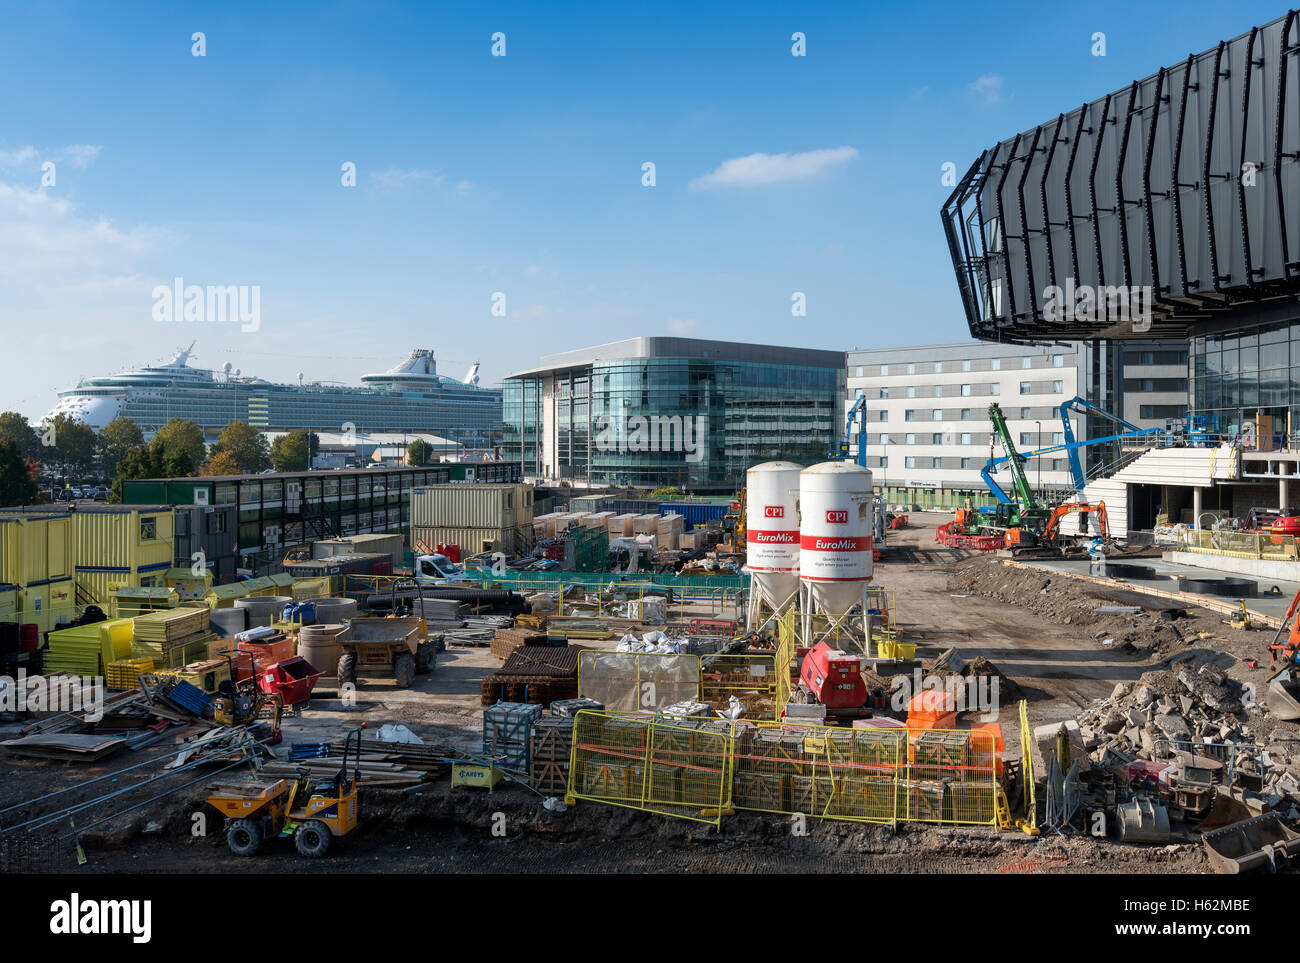 The construction of the WestQuay Watermark development in Southampton city centre in Hampshire, England, UK 23rd October 2016 Stock Photo